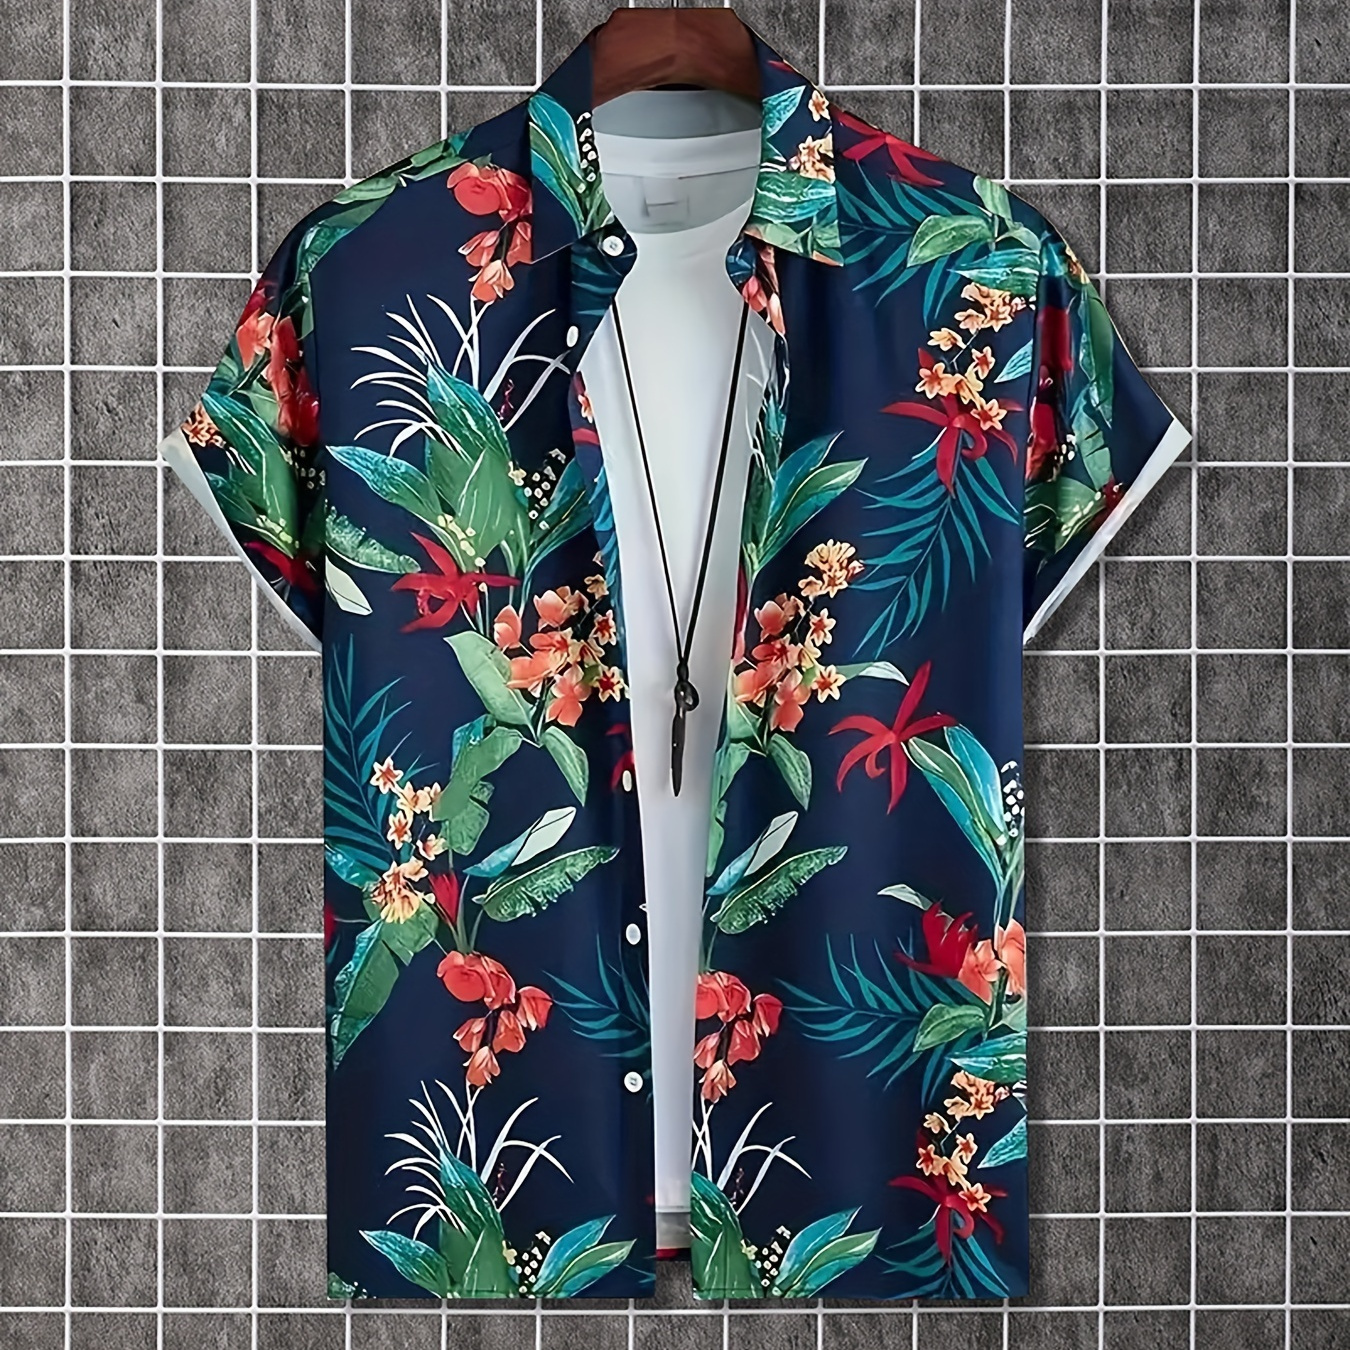 

Hawaii Floral Print Men's Summer Fashionable And Simple Short Sleeve Button Casual Lapel Simple Shirt, Trendy And Versatile, Suitable For Dates, Beach Holiday